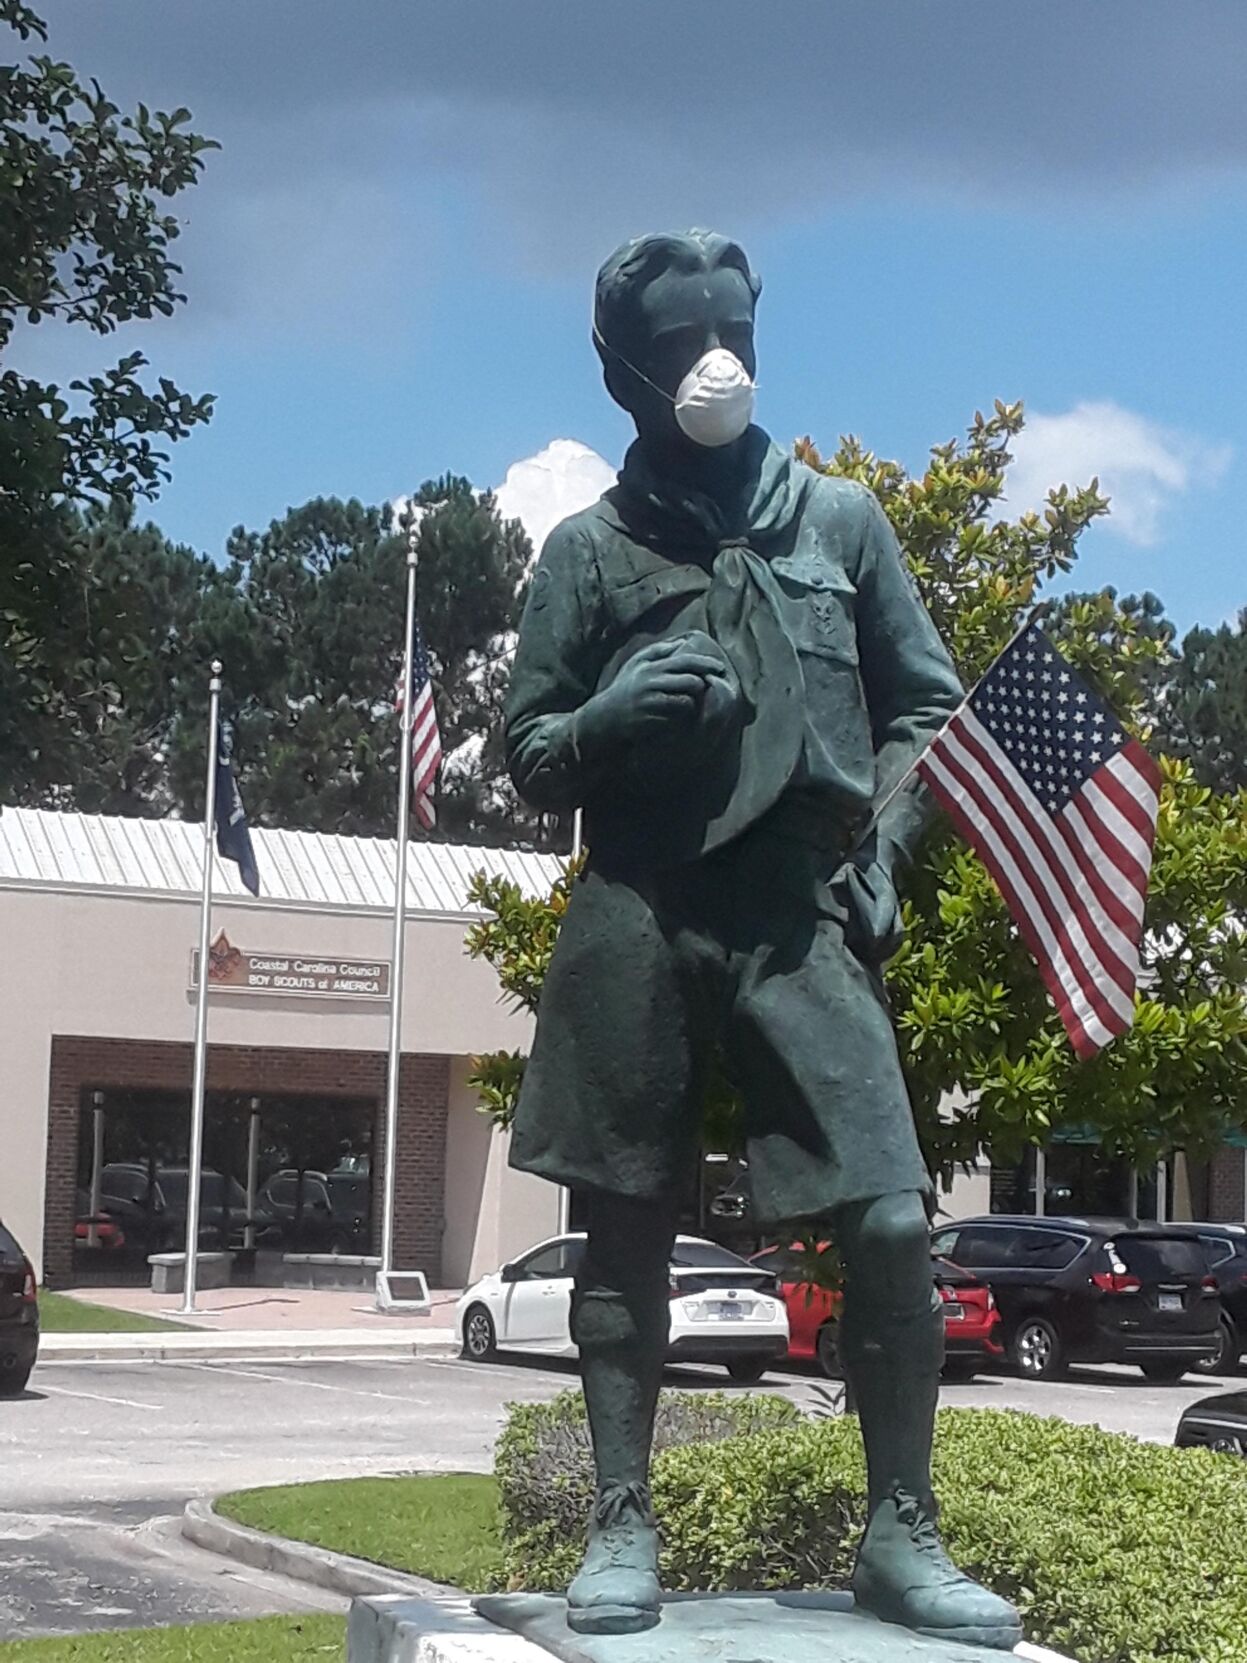 Local Boy Scout chapter increases reward for missing 1,000-pound statue ...